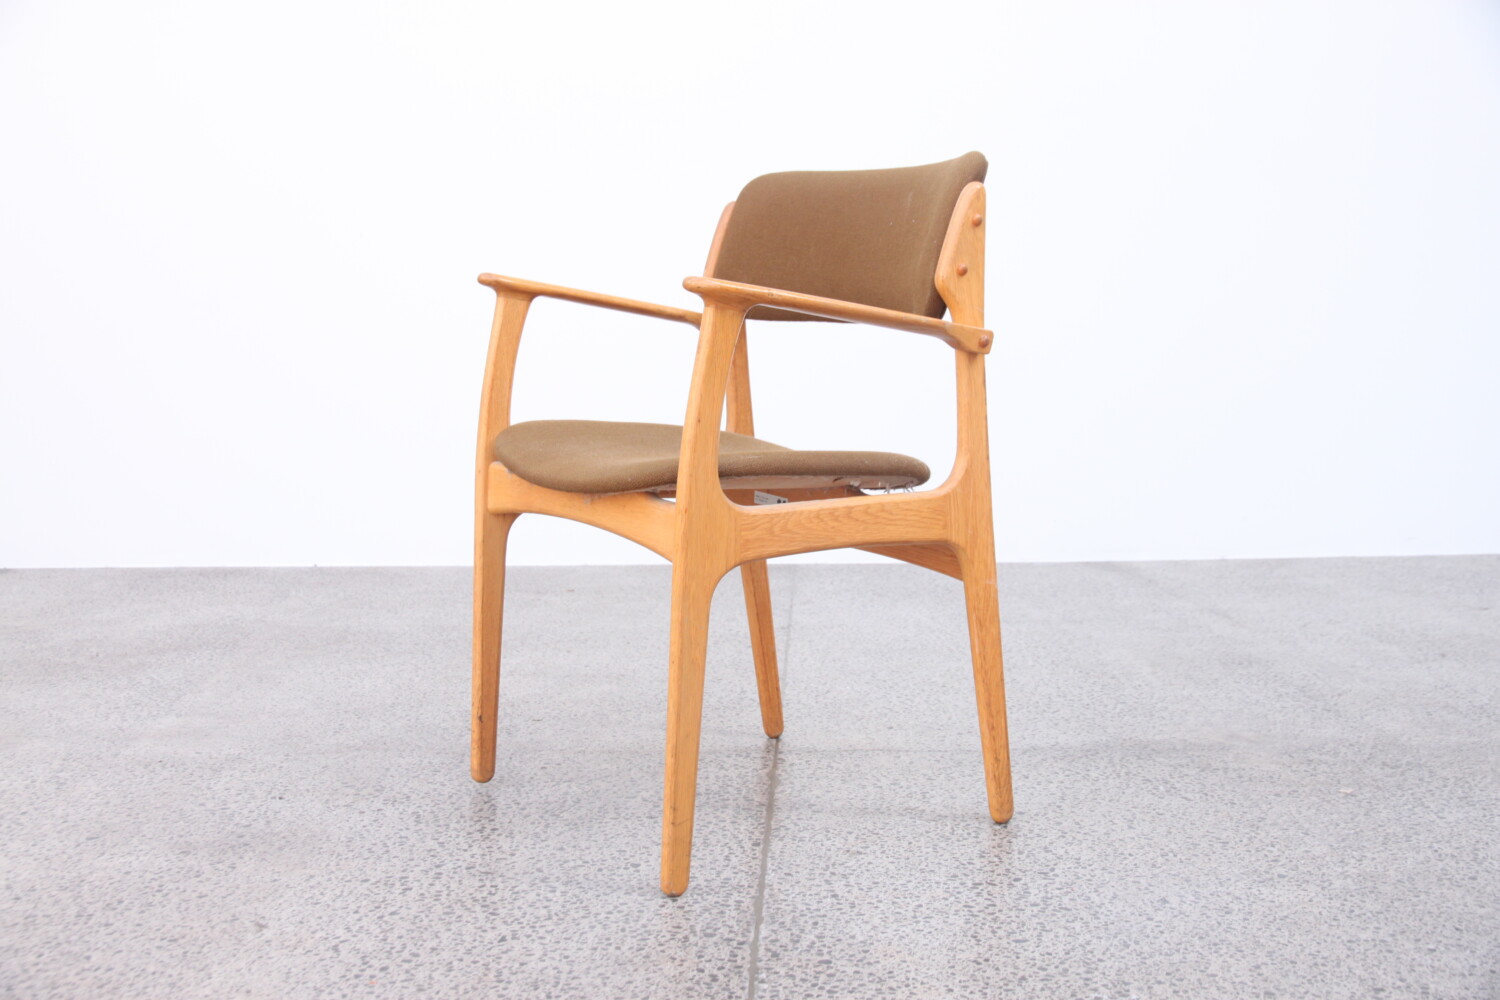 Dining chairs by Erik Buch x10